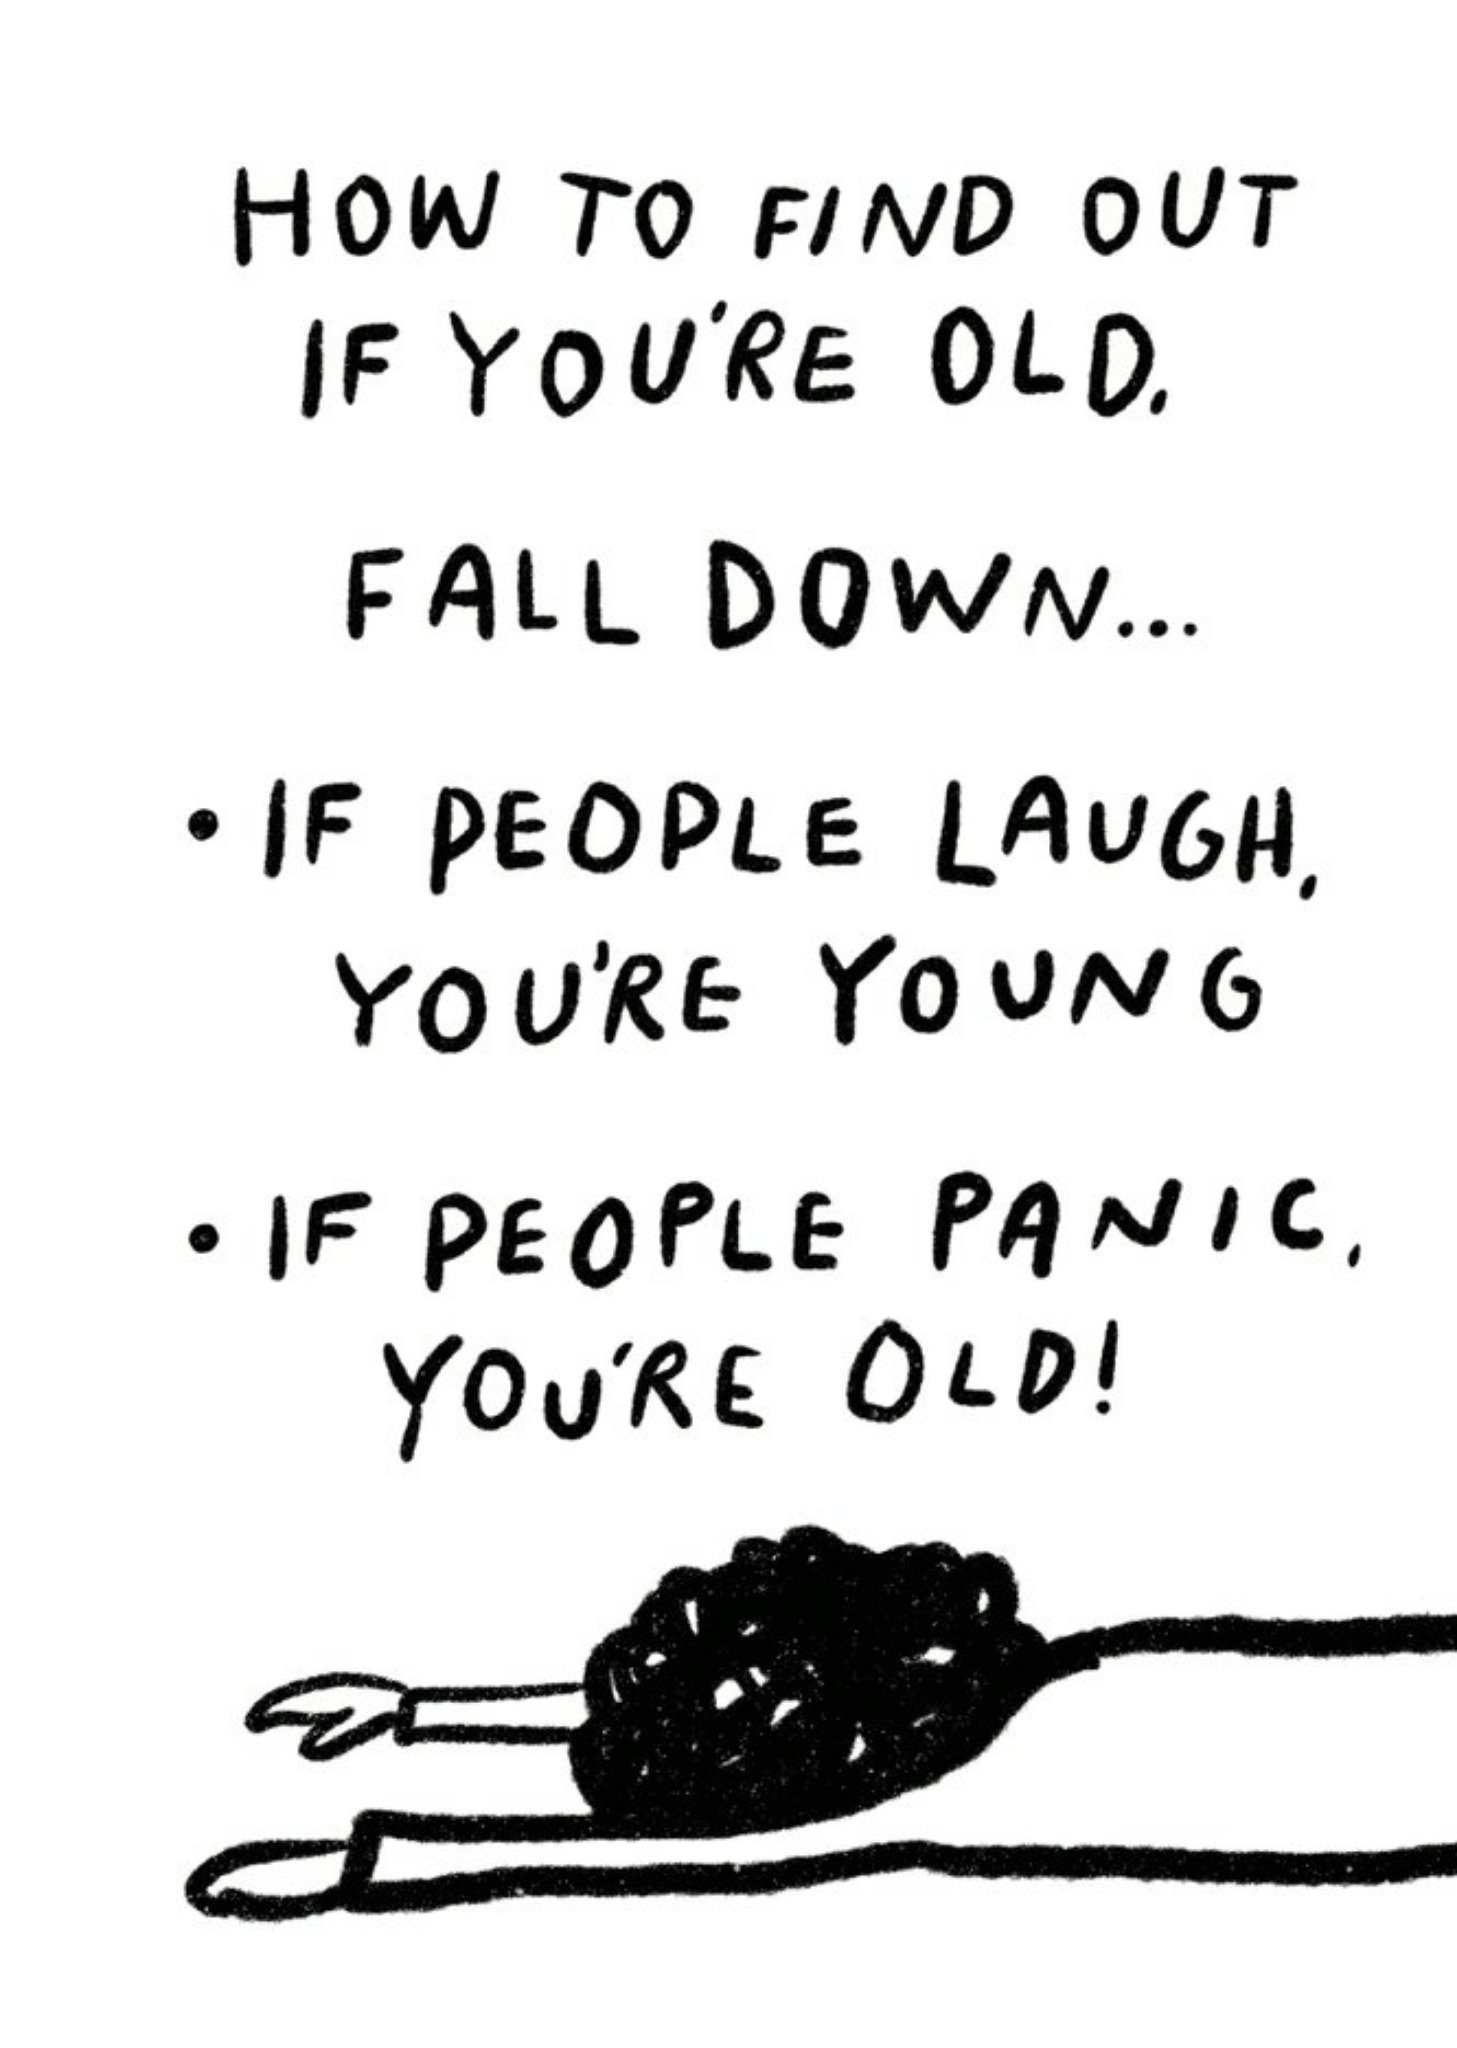 Other Pigment Find Out You Are Old Falling Down People Laugh People Panic Birthday Card, Large